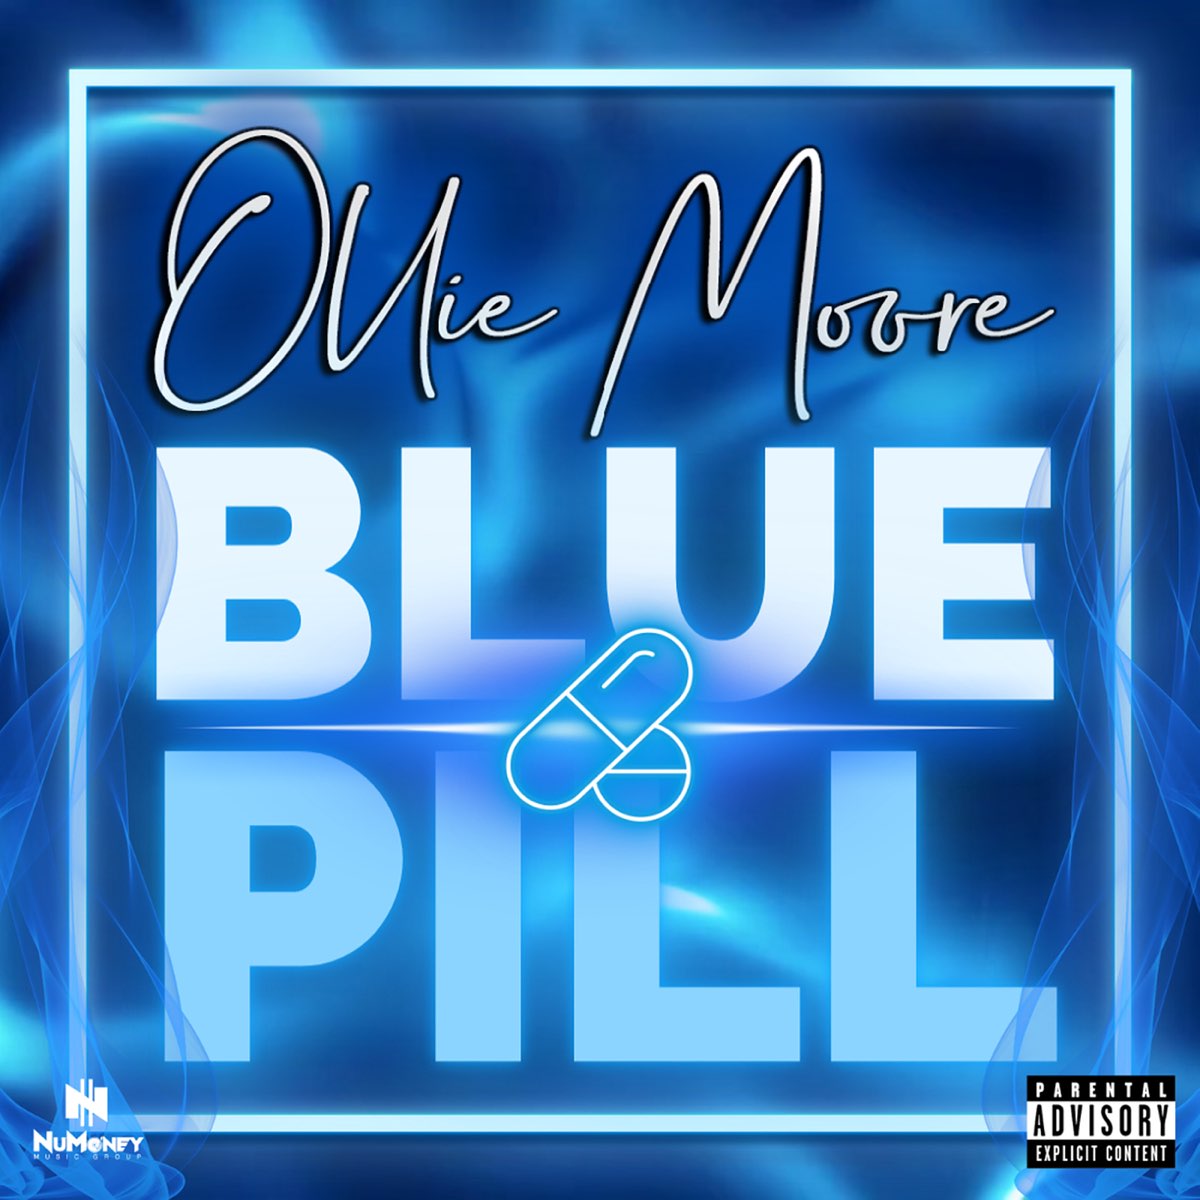 Ollie moore blue pill